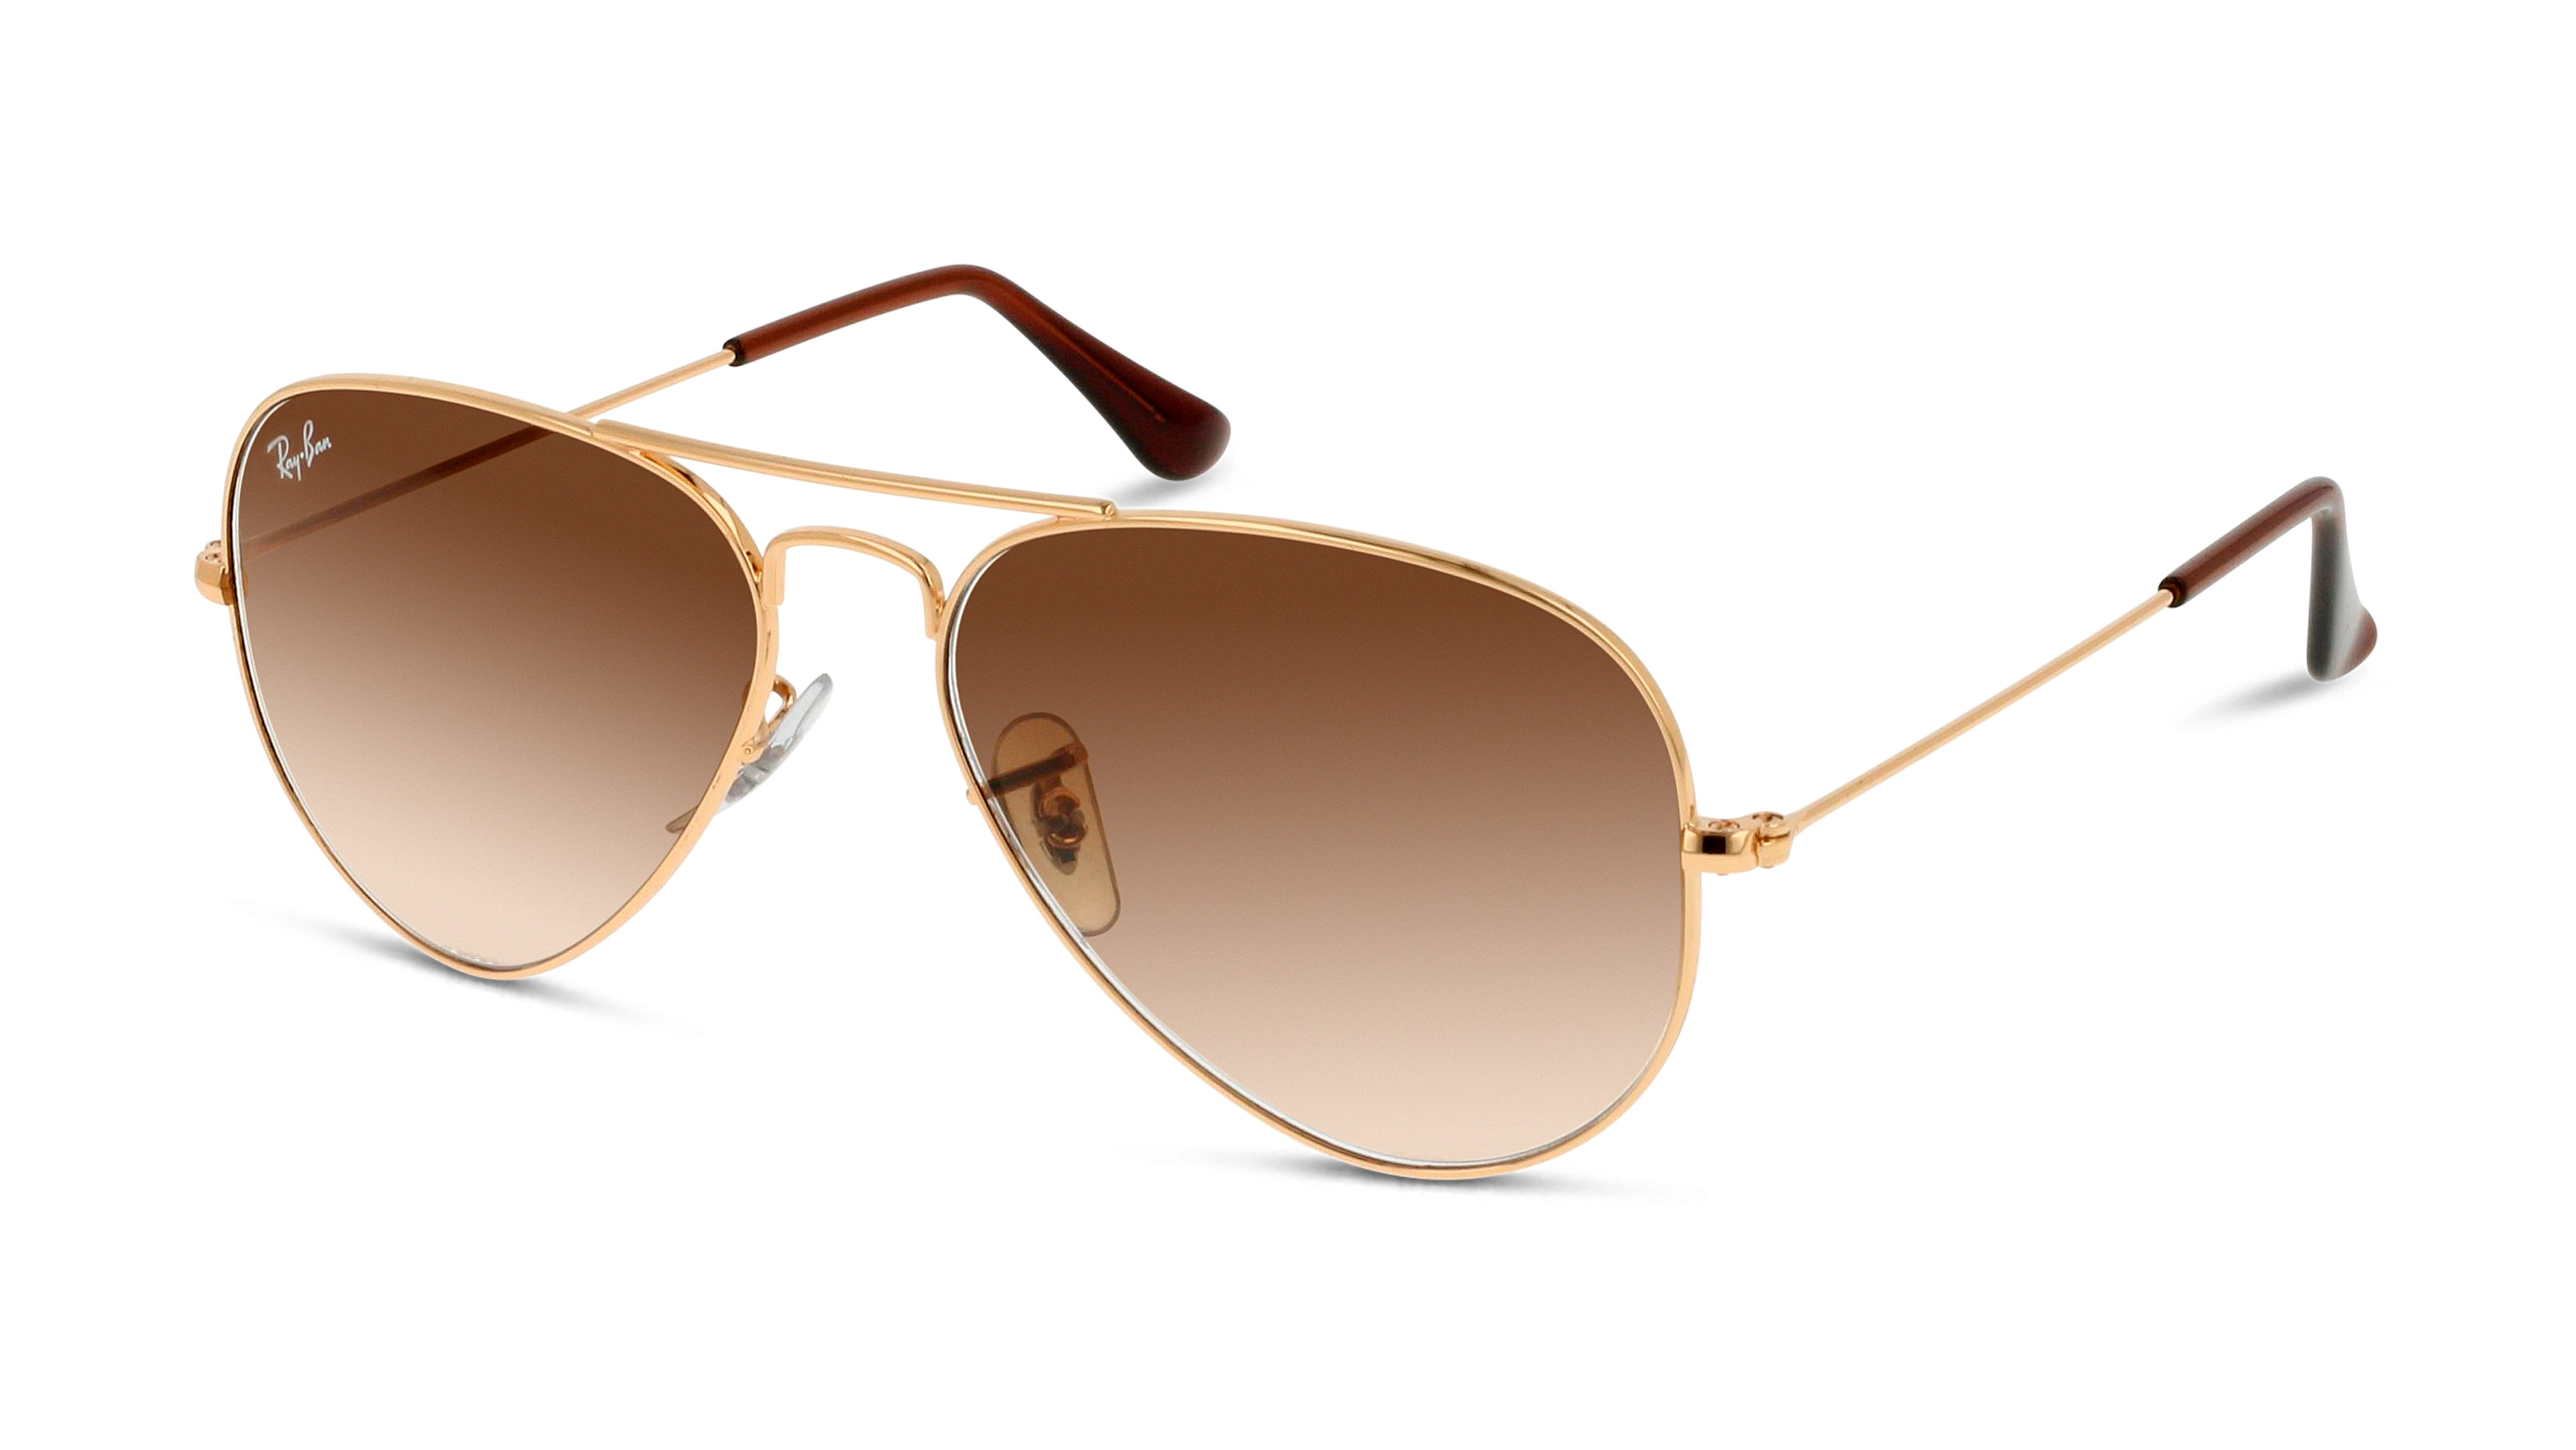 [products.image.angle_left01] Ray-Ban AVIATOR LARGE METAL 0RB3025 001/51 Sonnenbrille